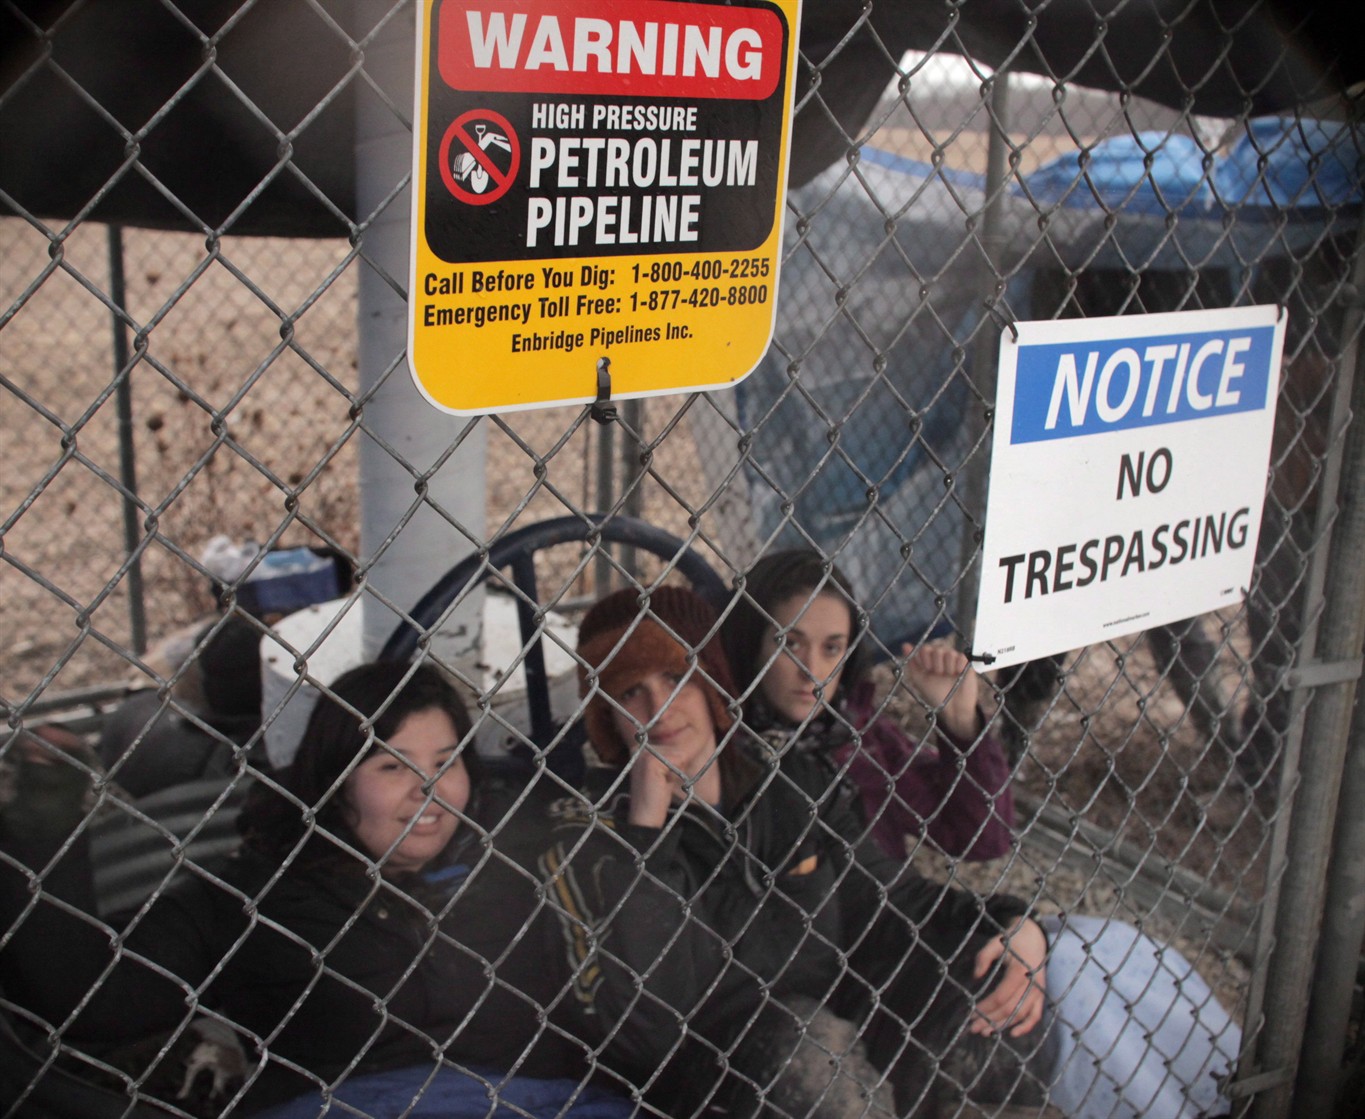 Enbridge says its Line 9 pipeline was offline for about 90 minutes this morning after three activists locked themselves to a valve site east of Sarnia, Ont., Monday, Dec.21, 2015. Enbridge is boosting security after recent cases of pipeline sabotage, THE CANADIAN PRESS/HO